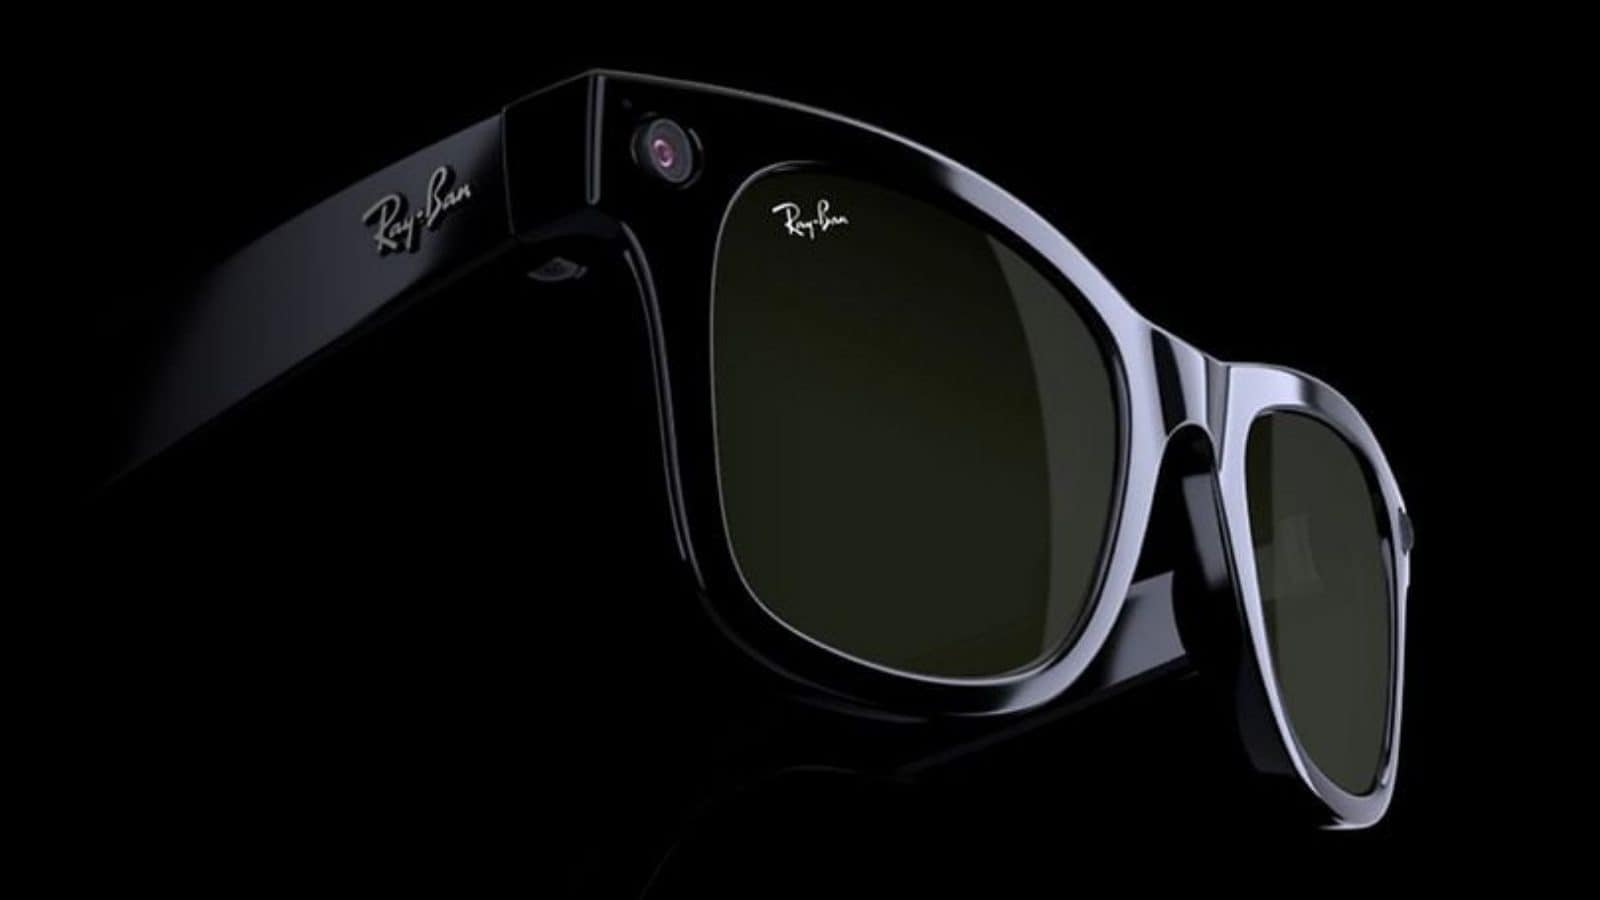 Facebook Smart Glasses In Photos: Check Out Ray Ban Stories With Two ...